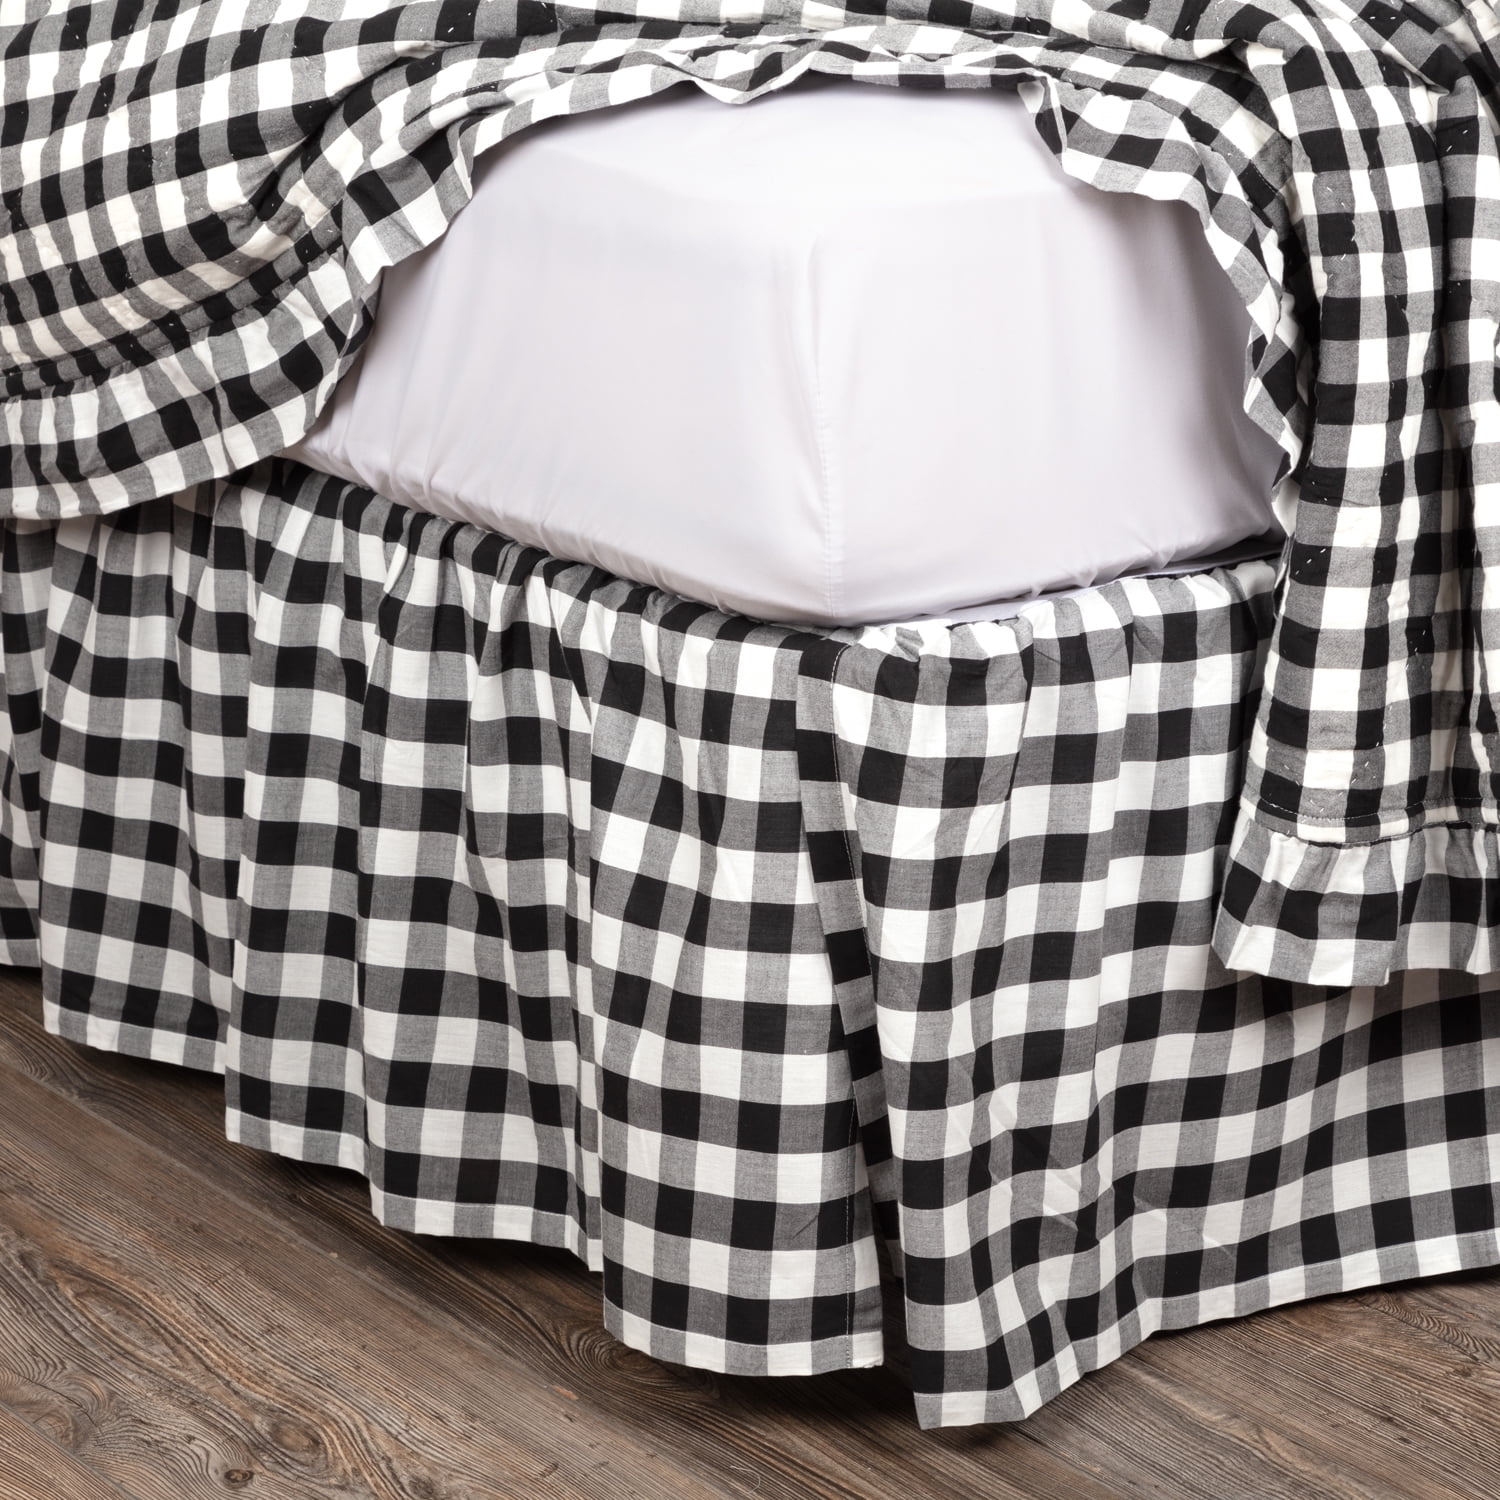 VHC Black Check Star Country Farmhouse Pleated Cotton Bed Skirt 